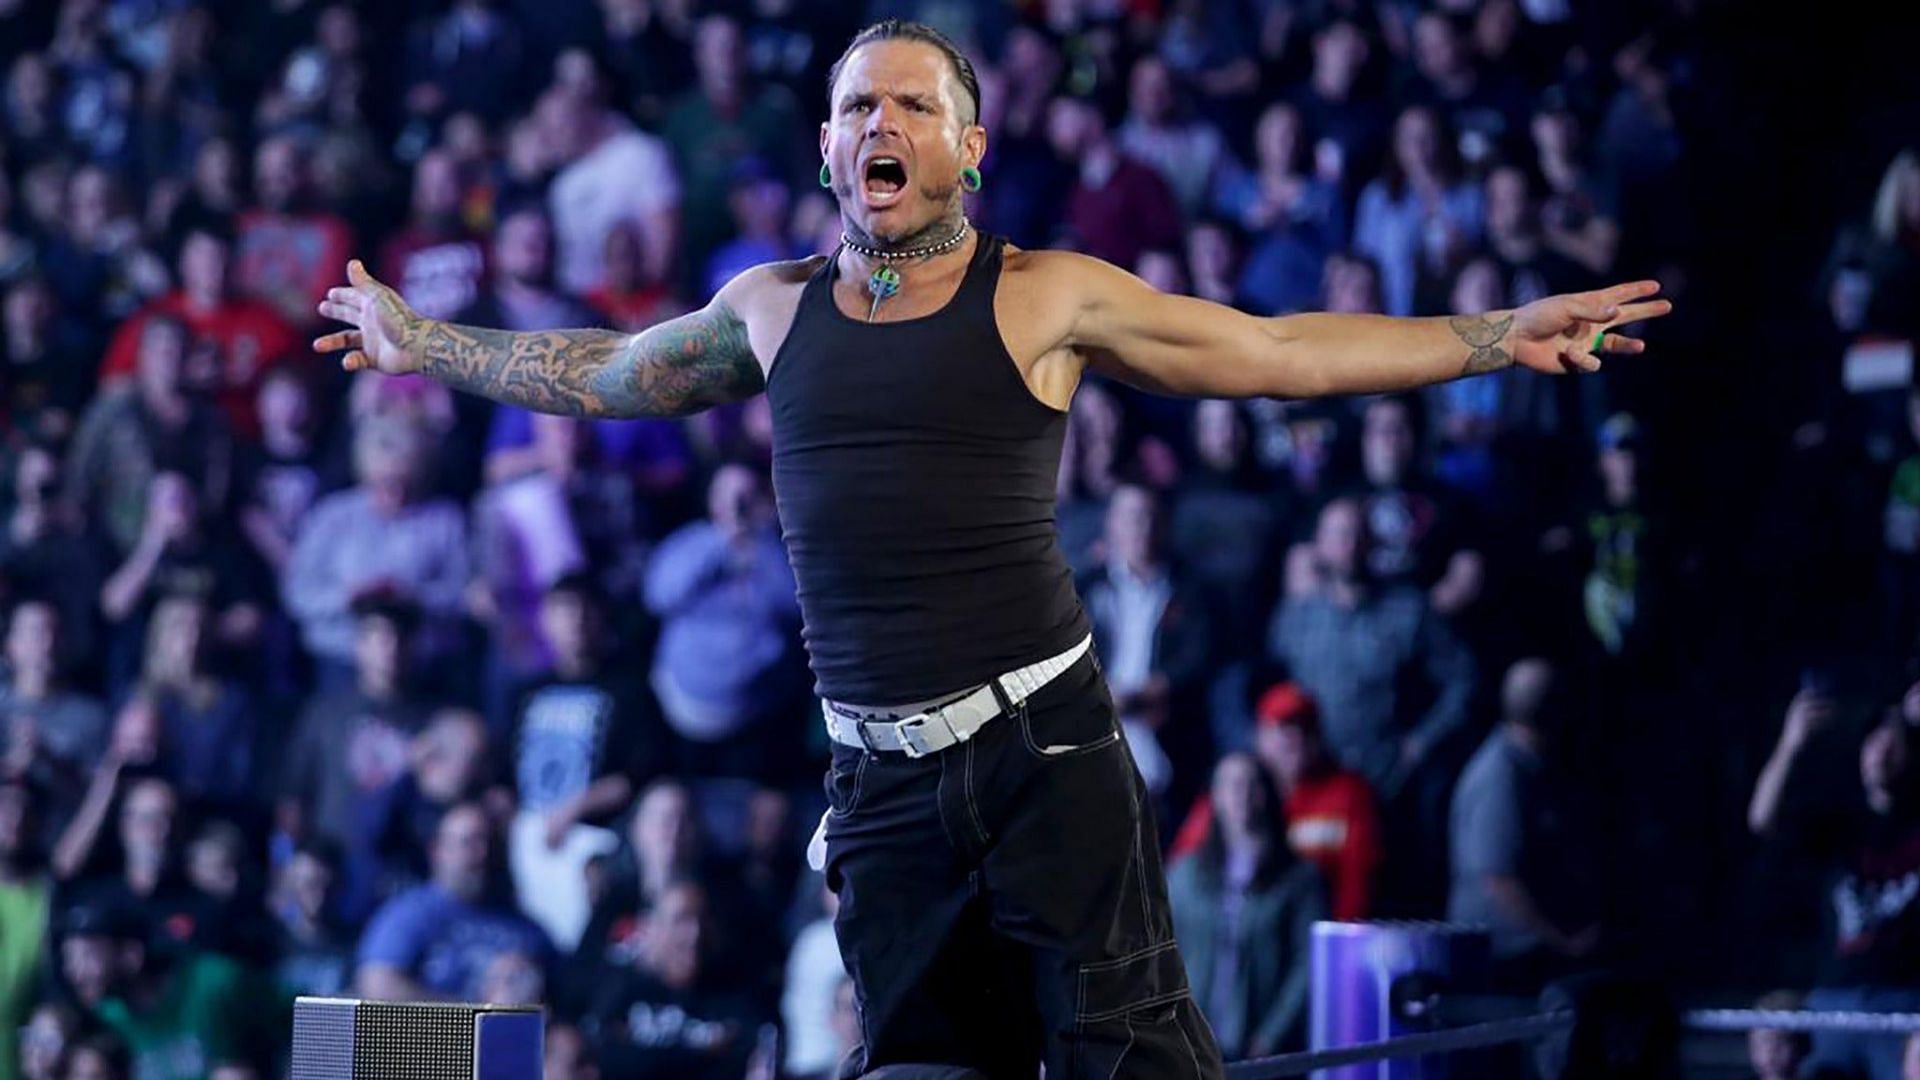 Jeff Hardy posing at a WWE event in 2009